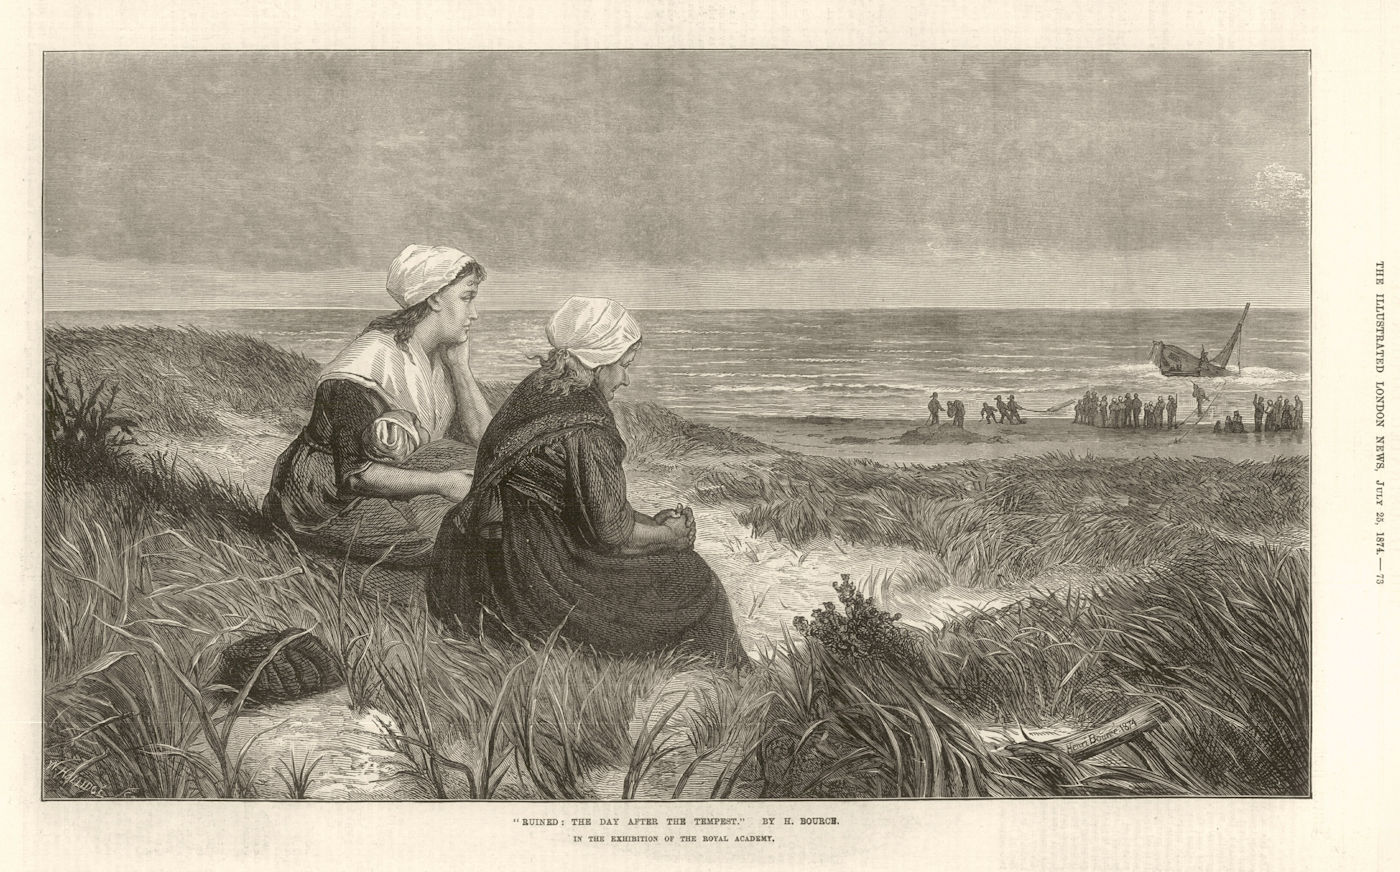 Associate Product " Ruined: the day after the Tempest ", by H. Bourch. Fishermen shipwreck 1874